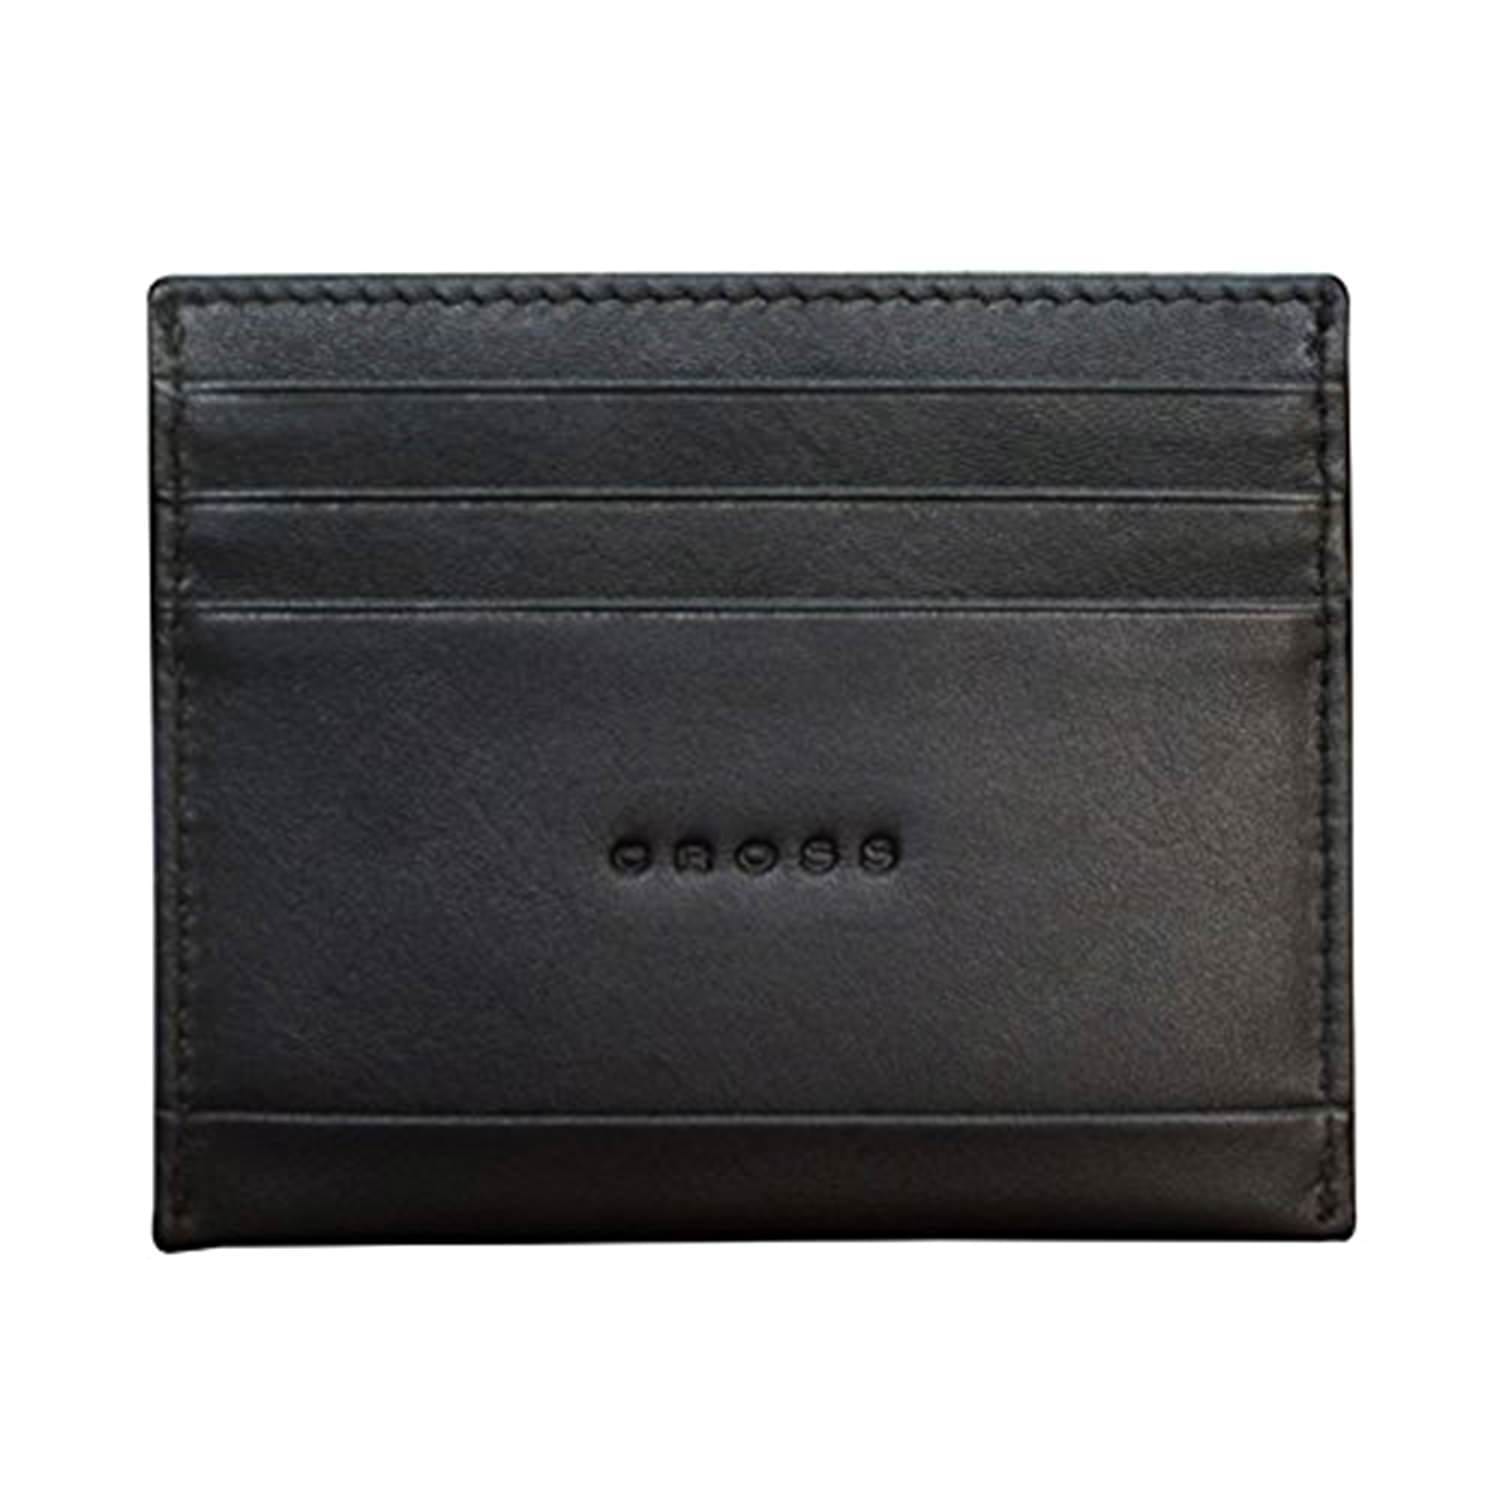 Cross Classic Century Credit Card Case for Men Leather Black - AC018257-1-1 - Jashanmal Home